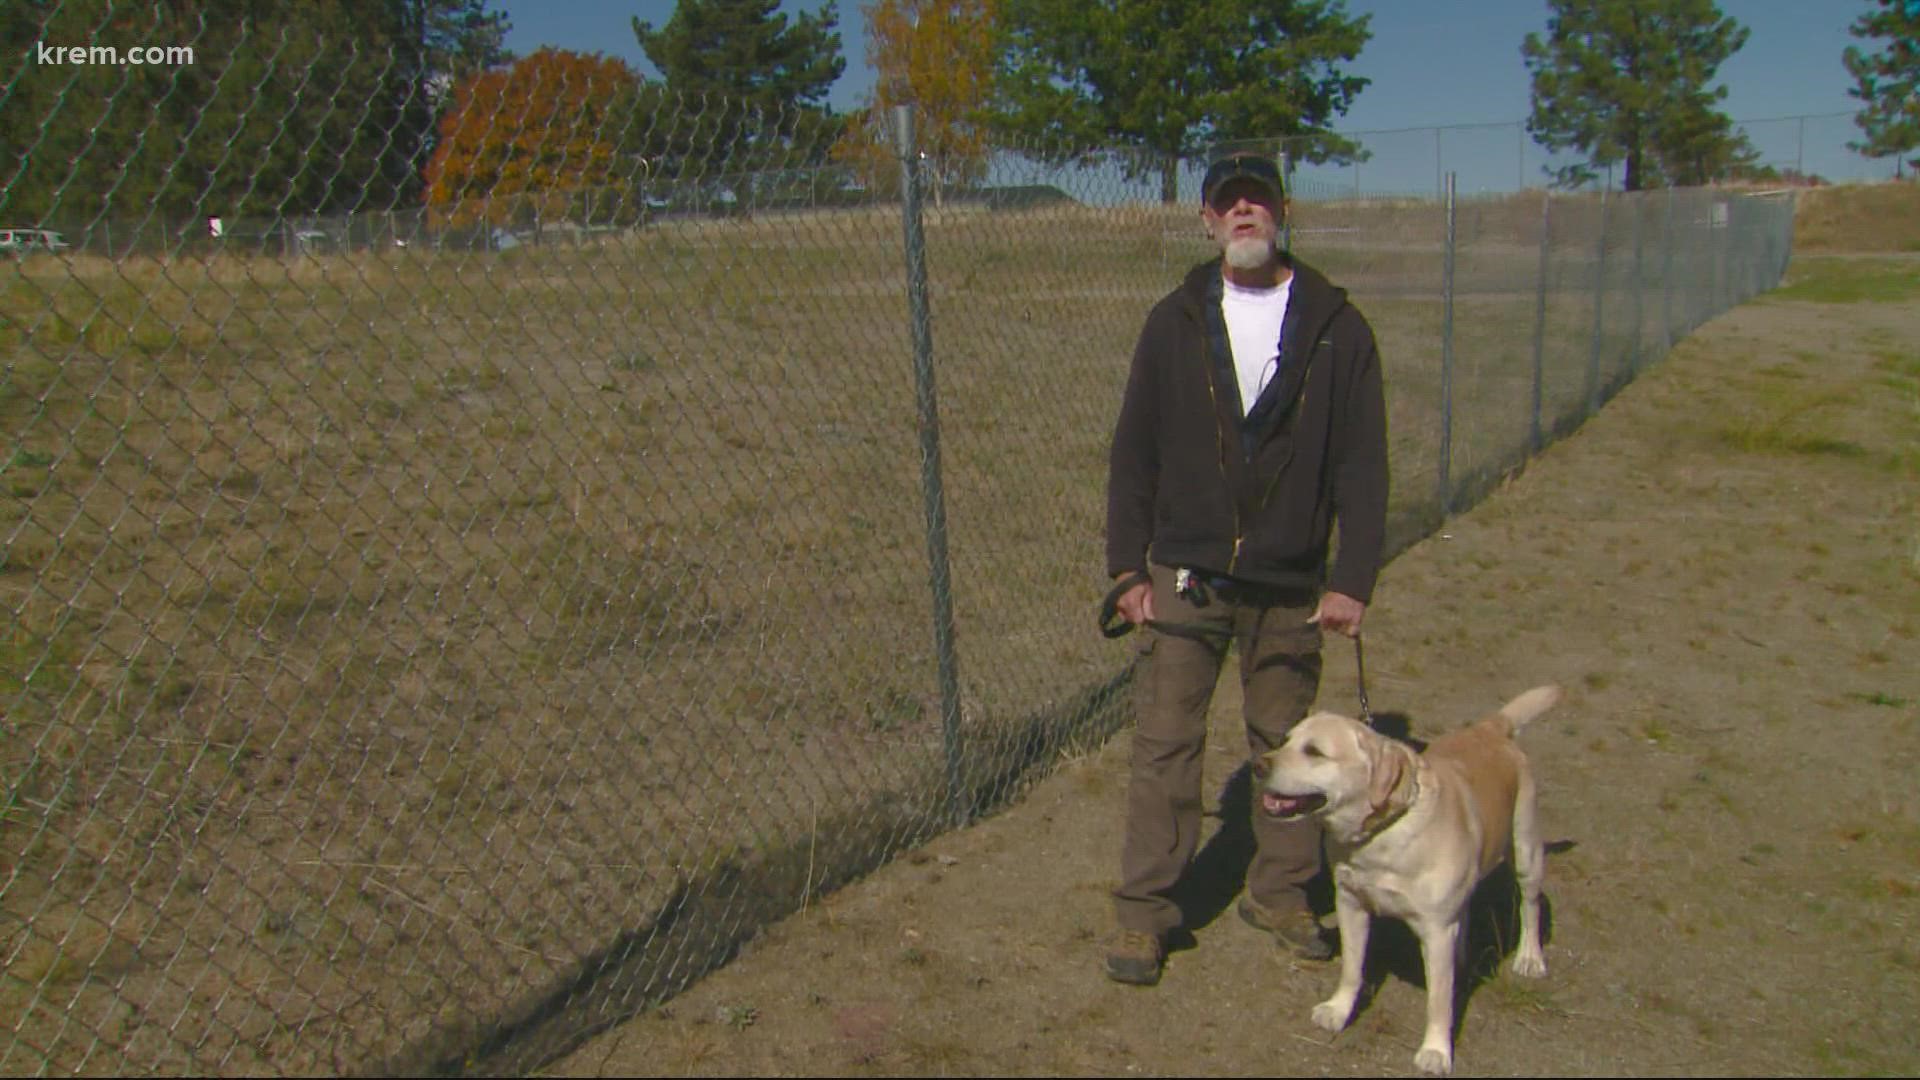 The future of Spokane South Hill Dog Park took a dramatic turn as the former park was shut down to make room for a new middle school.